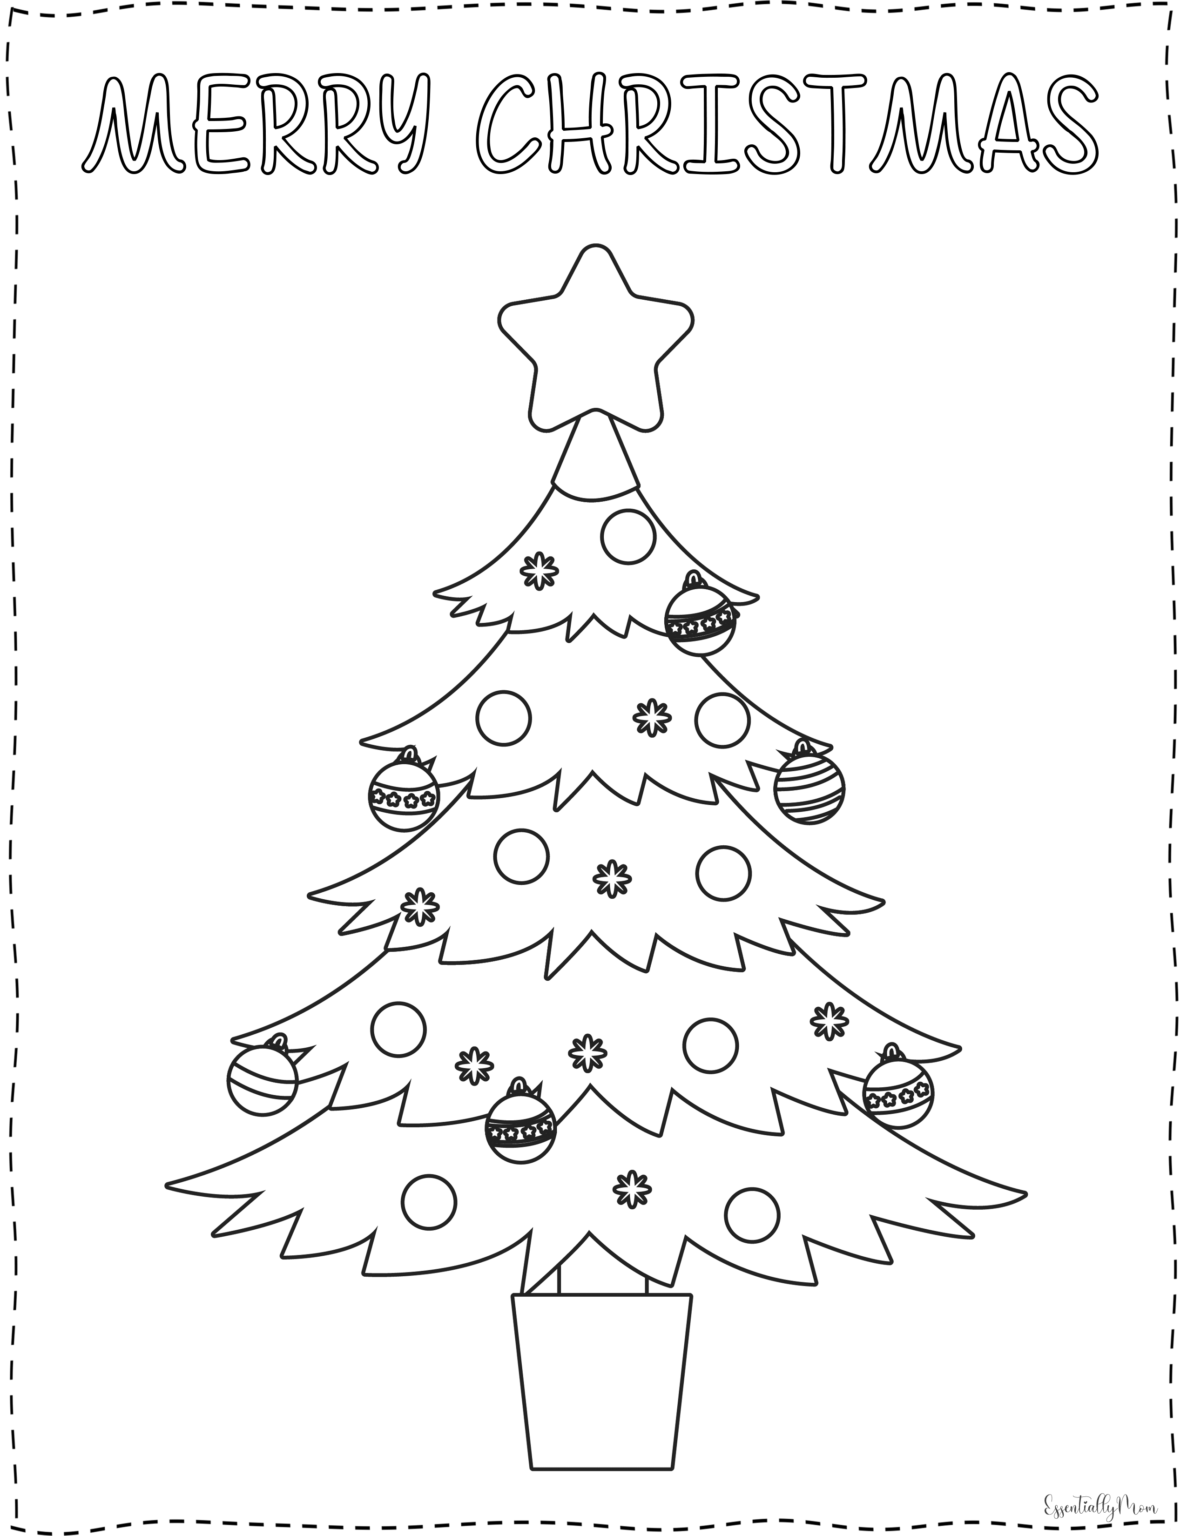 FREE Christmas Printable Coloring Pages - Essentially Mom